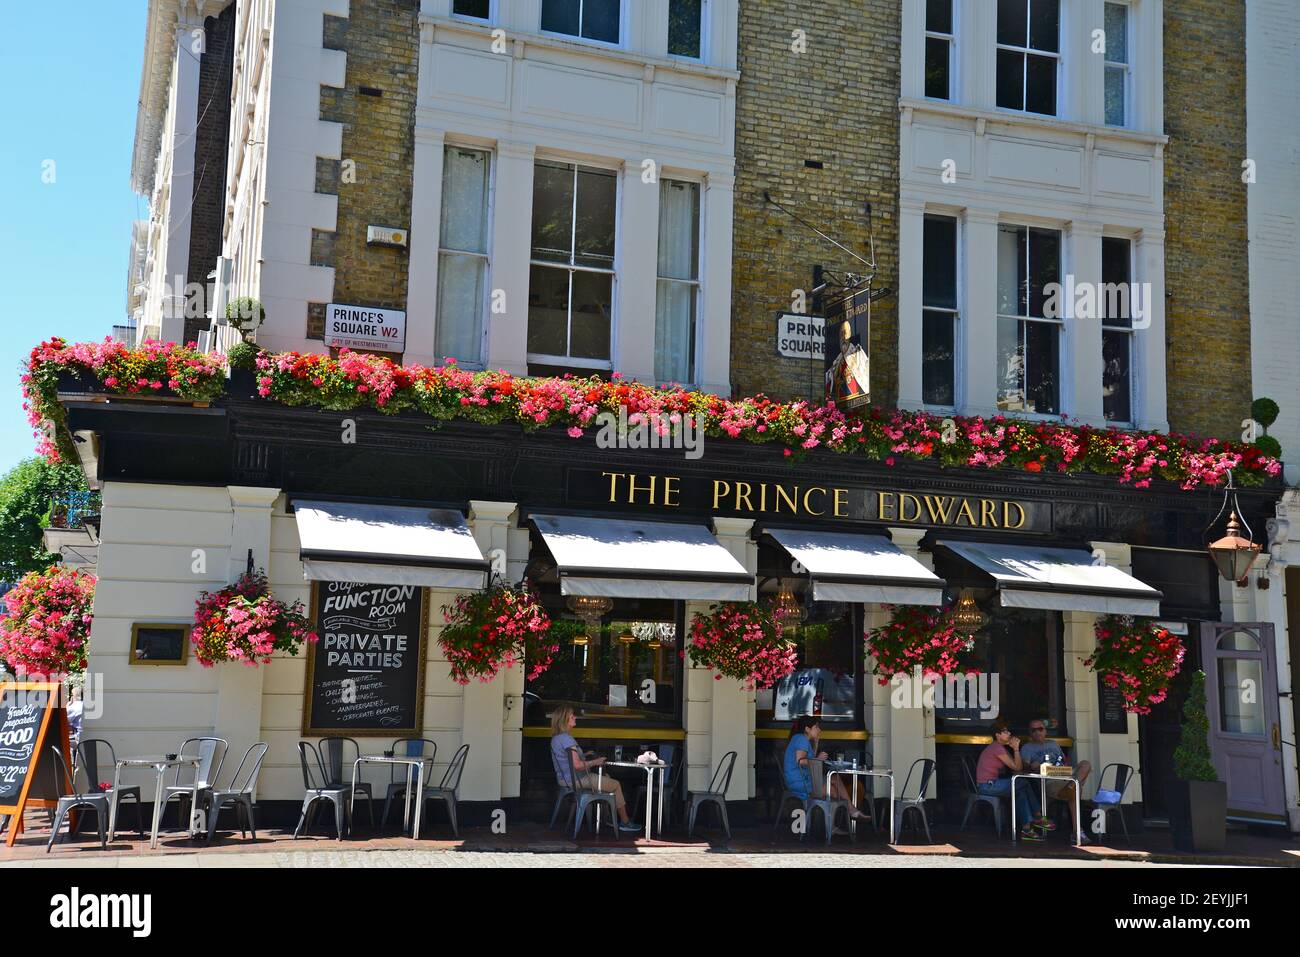 People chatting outside The Prince Edward pub in Bayswater, London, England Stock Photo